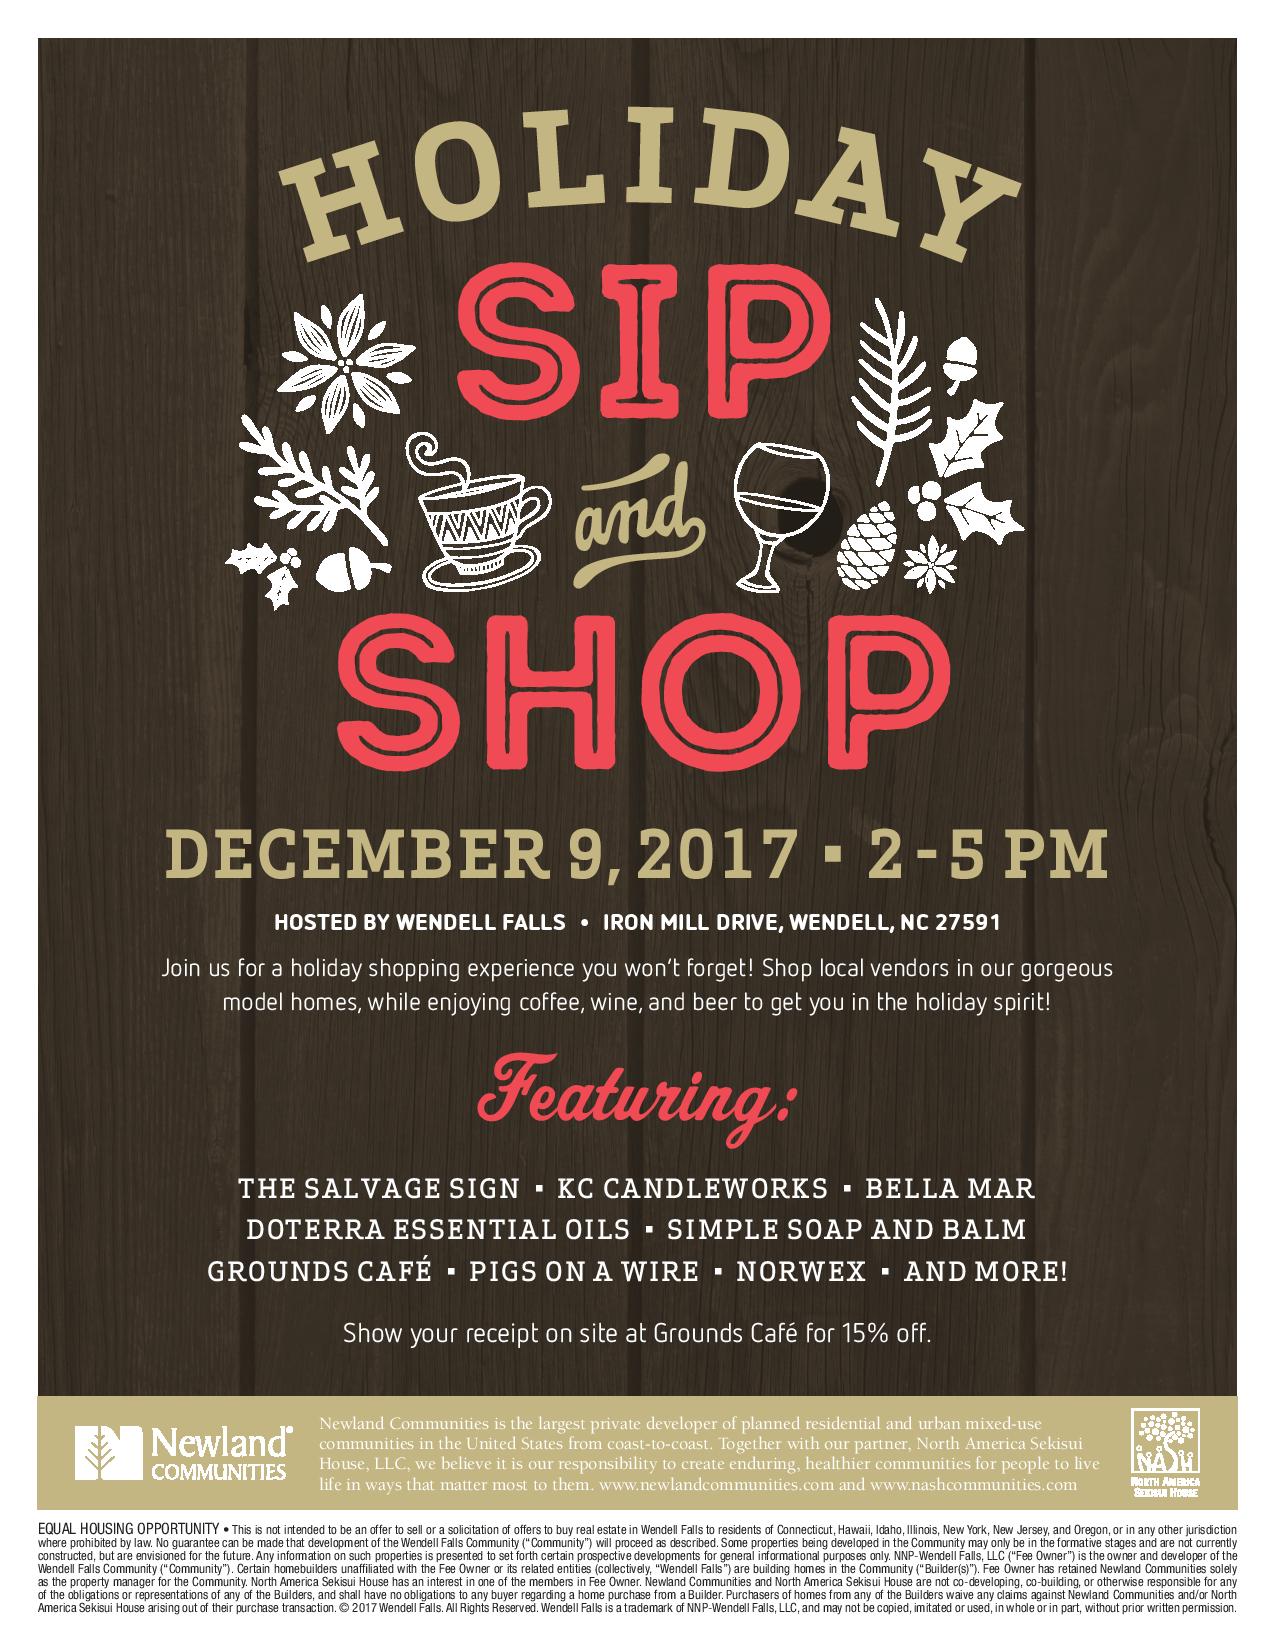 Holiday Sip and Shop Flyer